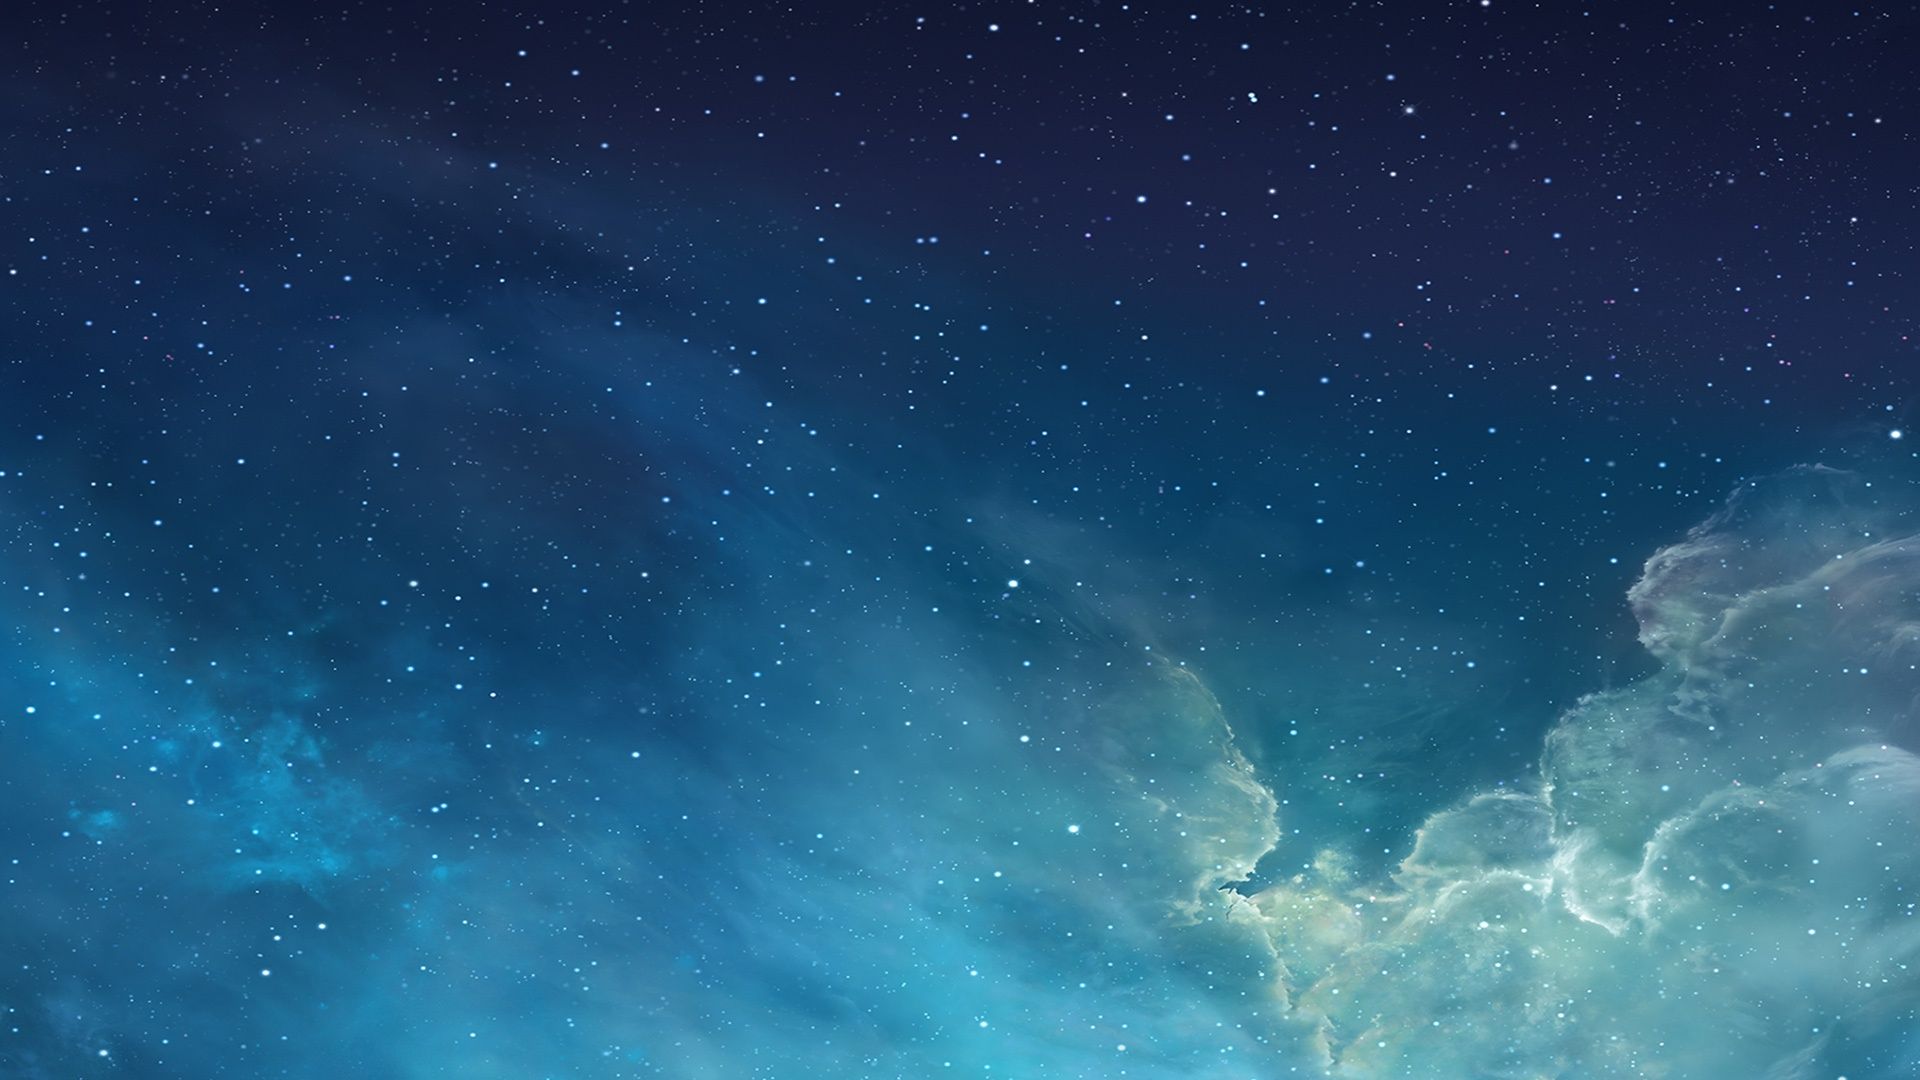 iOS 7 Galaxy Wallpapers | HD Wallpapers